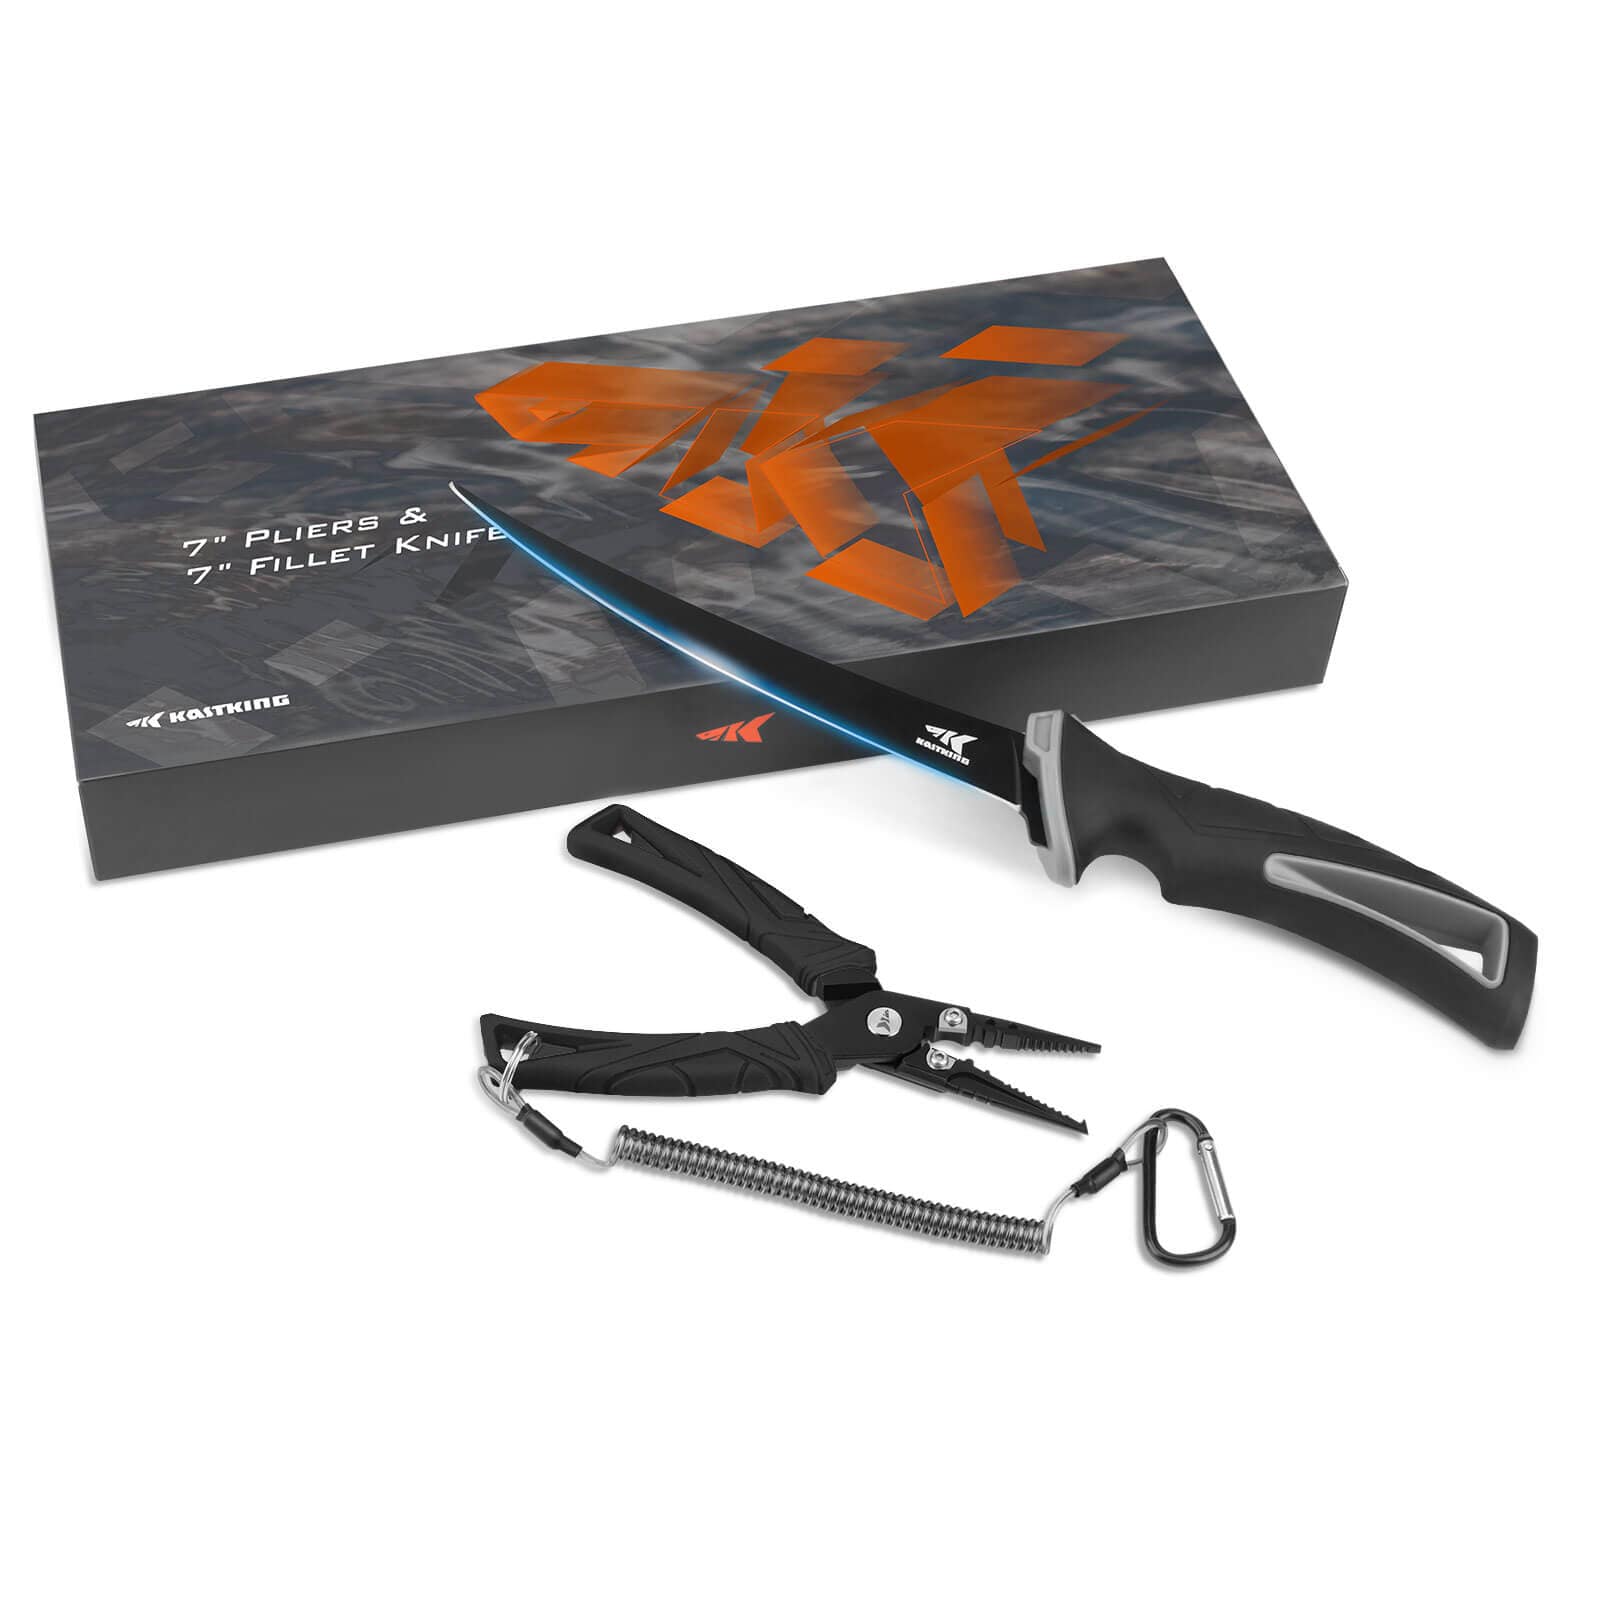 KastKing Intimidator Bait Knife and Fillet Knives with Sharpening Stee